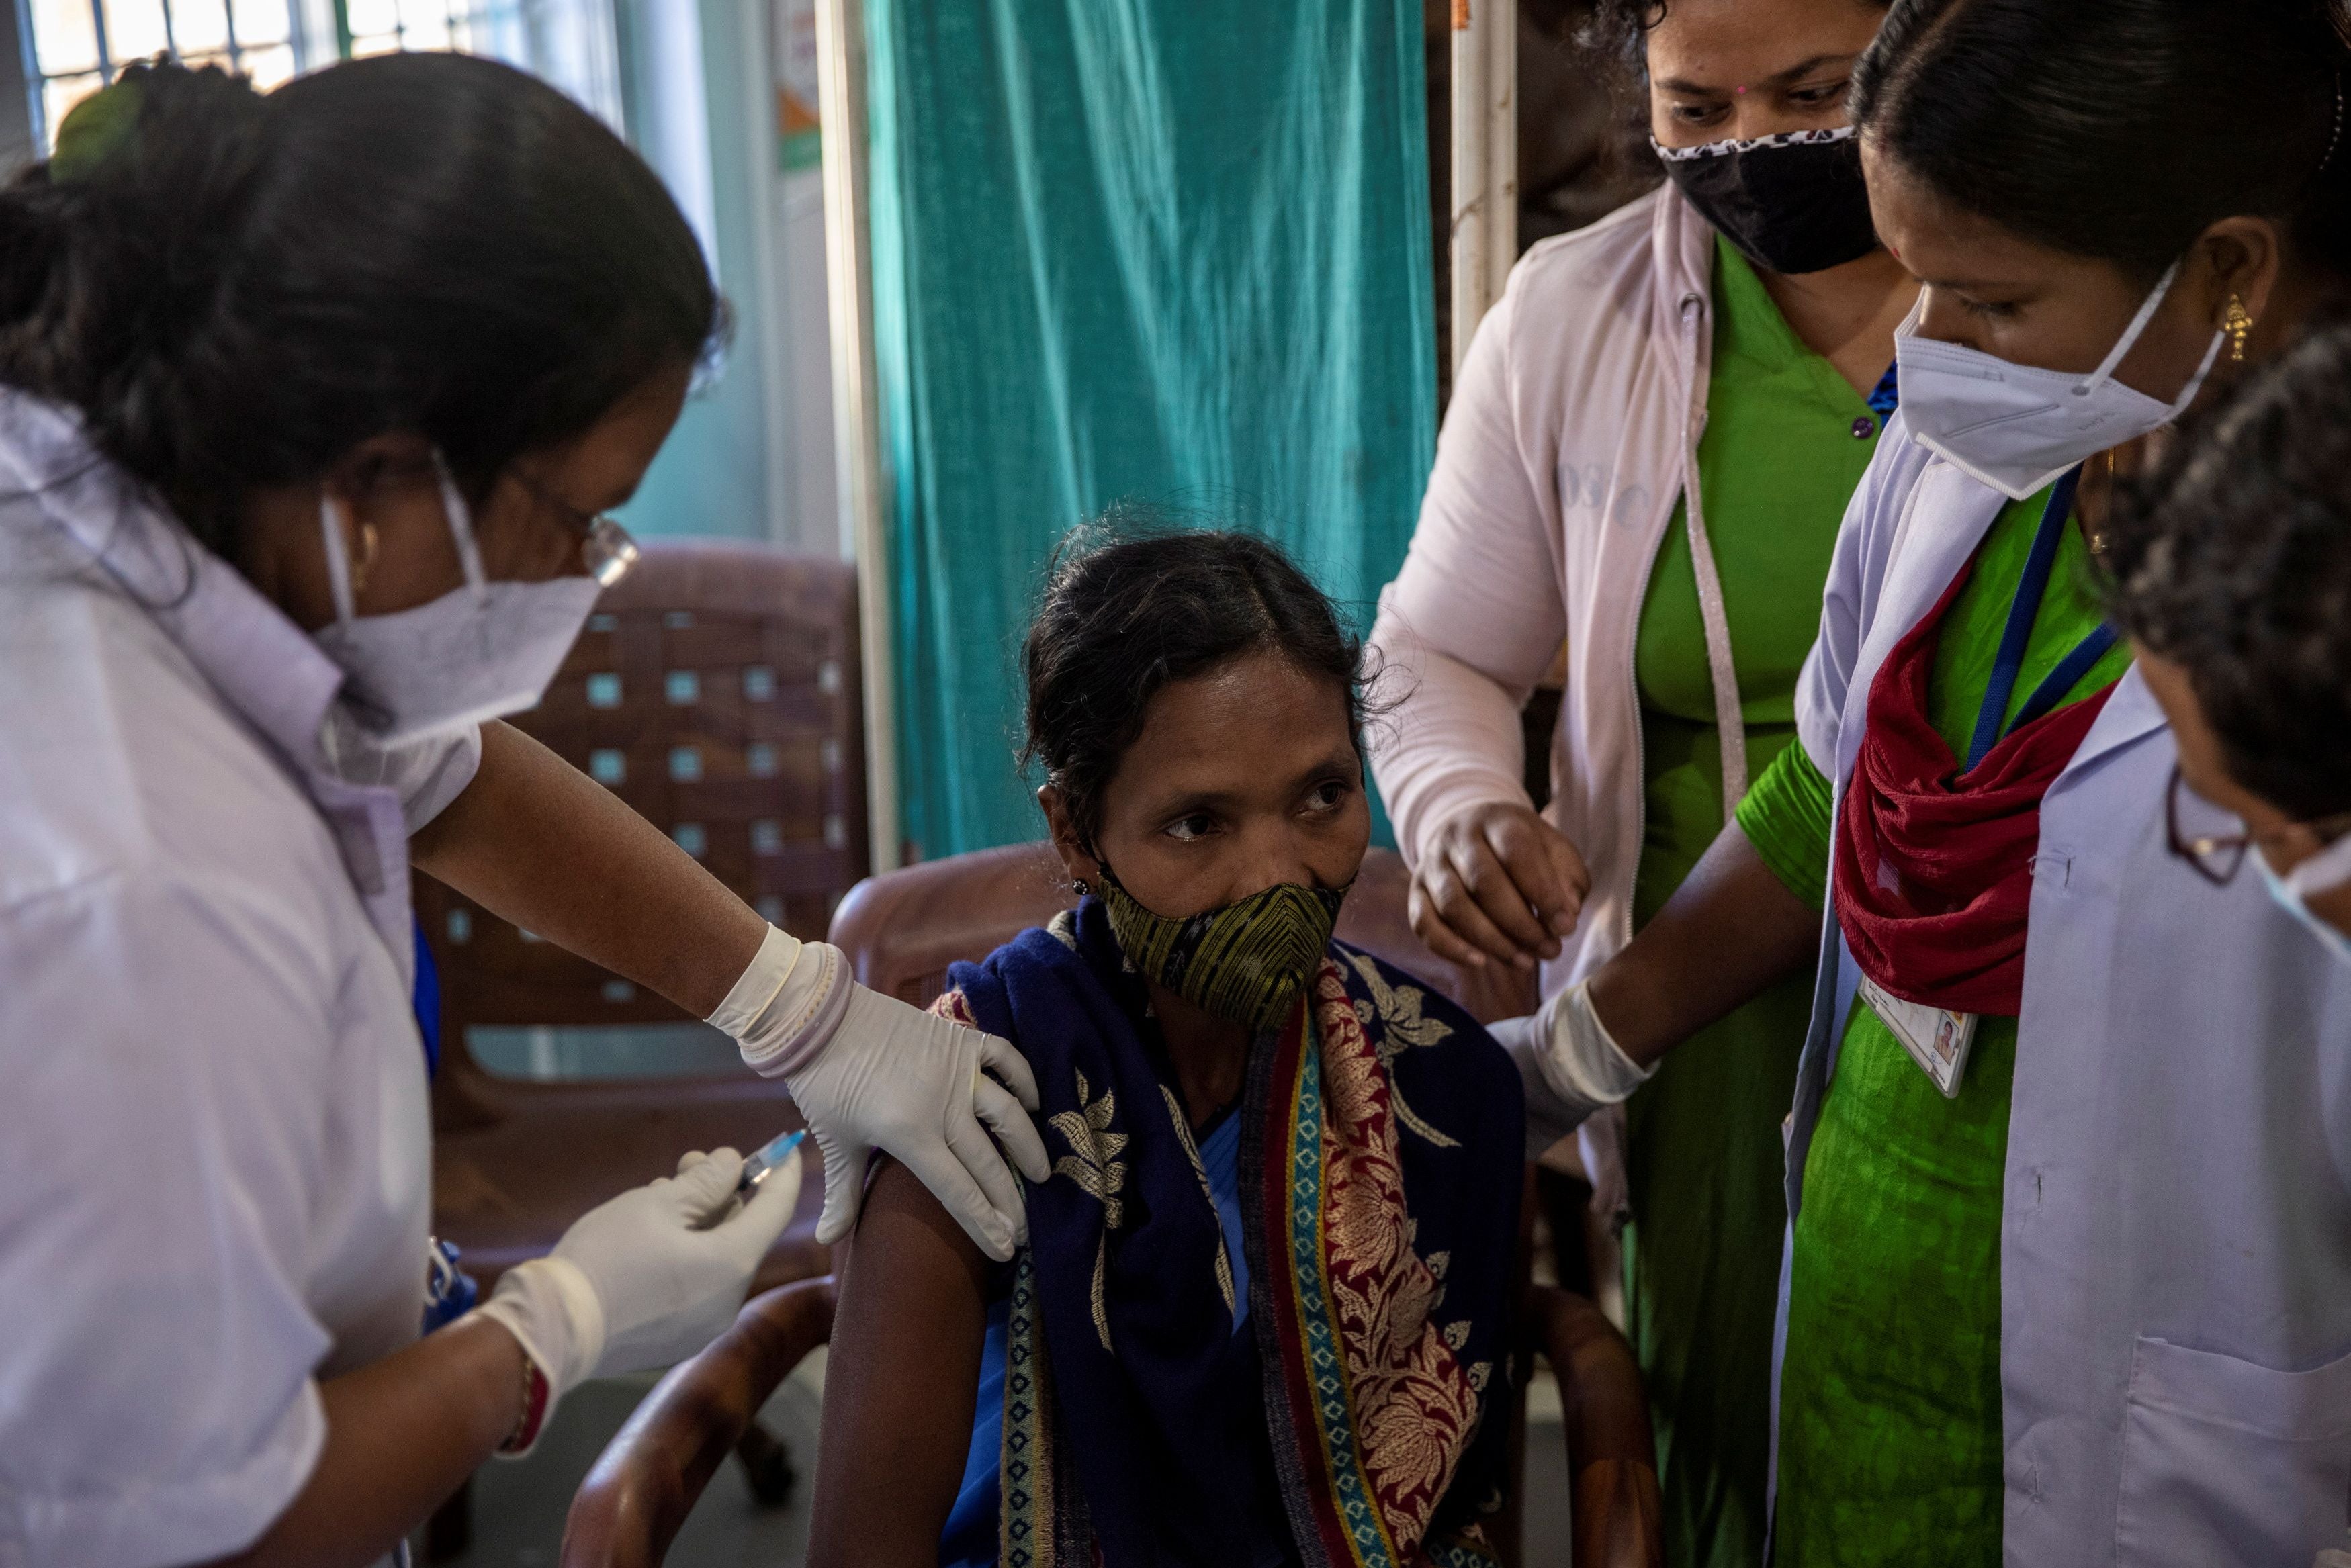 Reena Jani, a health worker, receives a vaccine at a community health centre in India